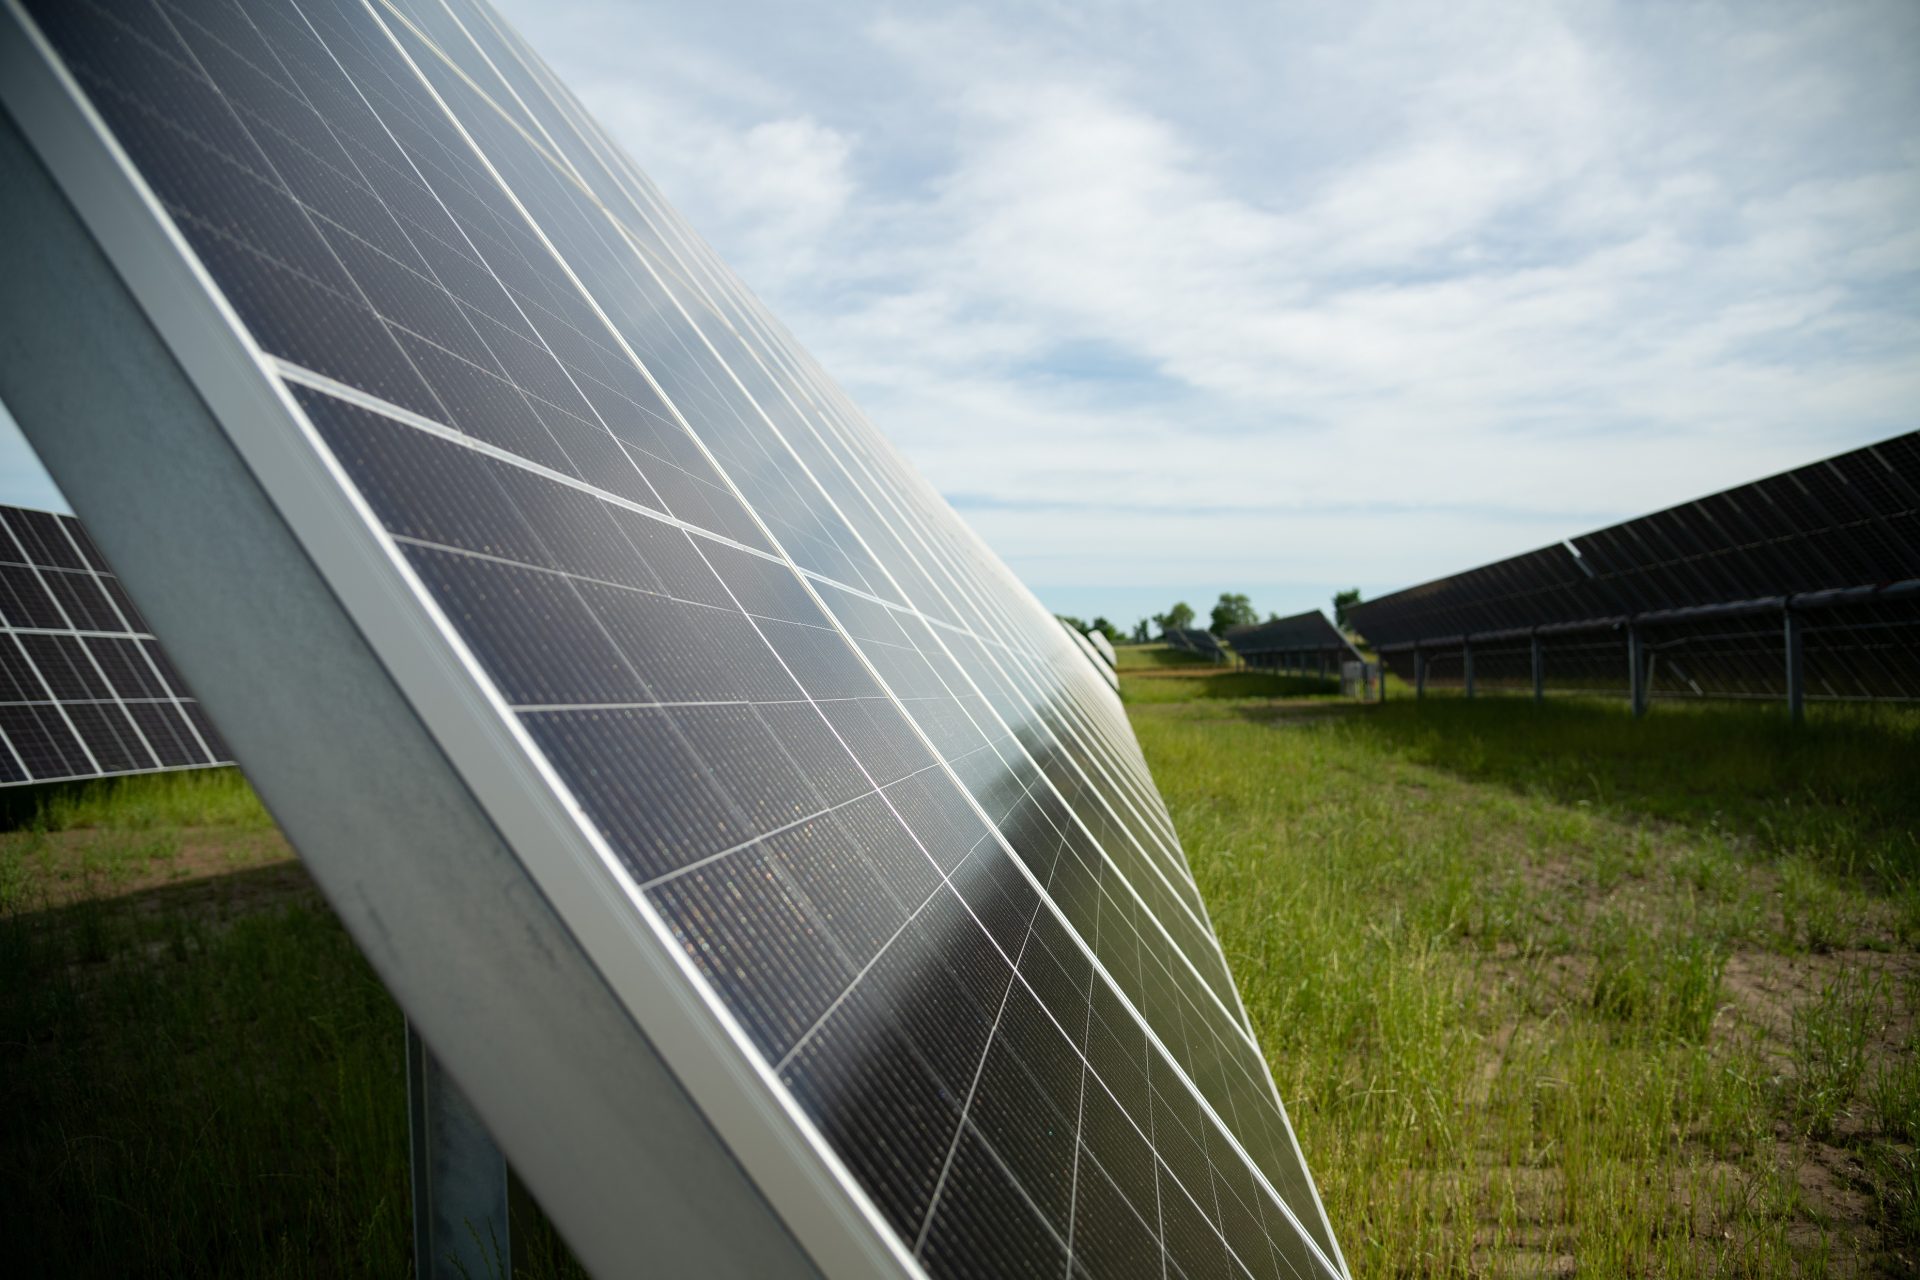 ameren-says-planned-solar-installation-in-mid-missouri-will-inject